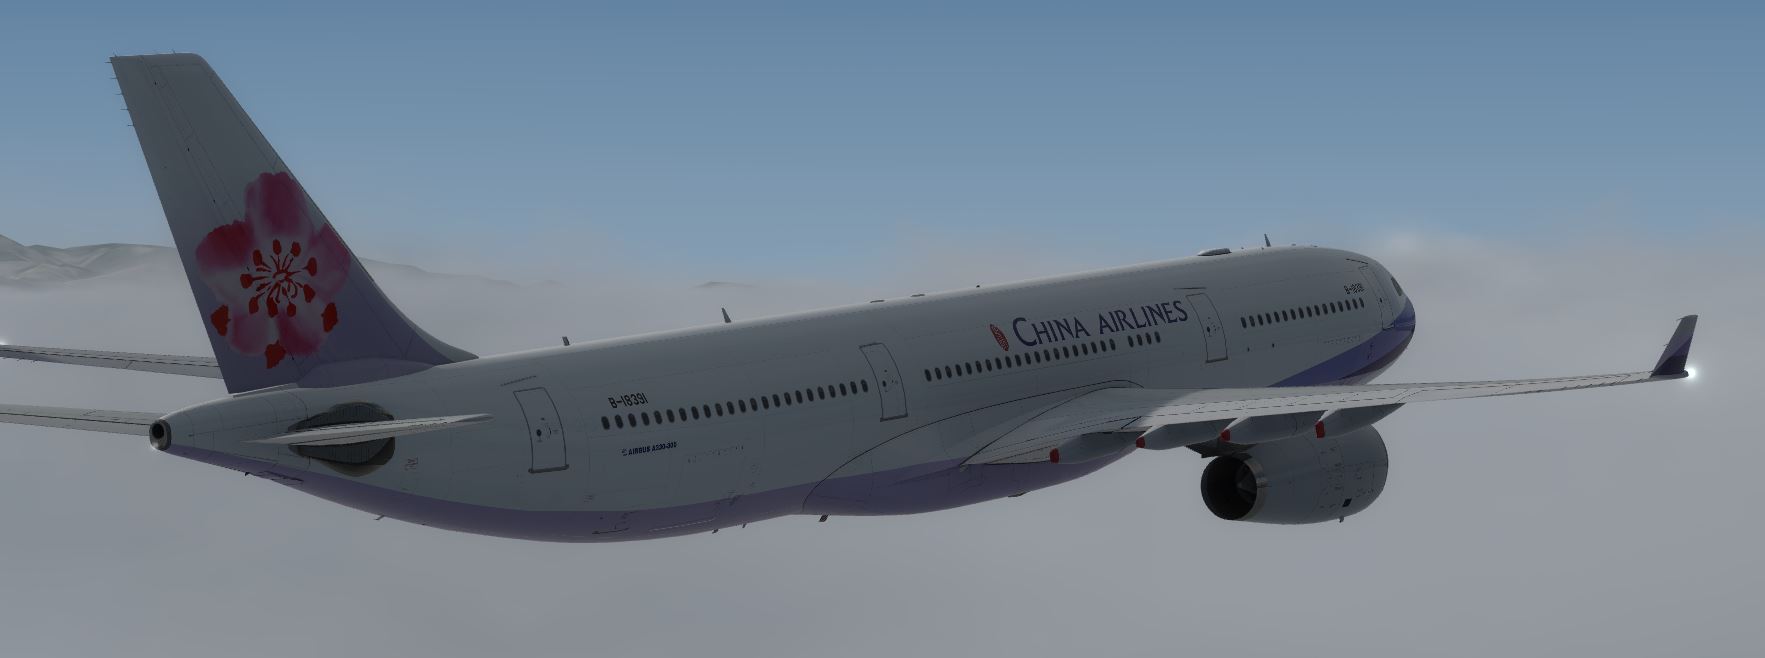 AS A330 ChinaAirline-9619 